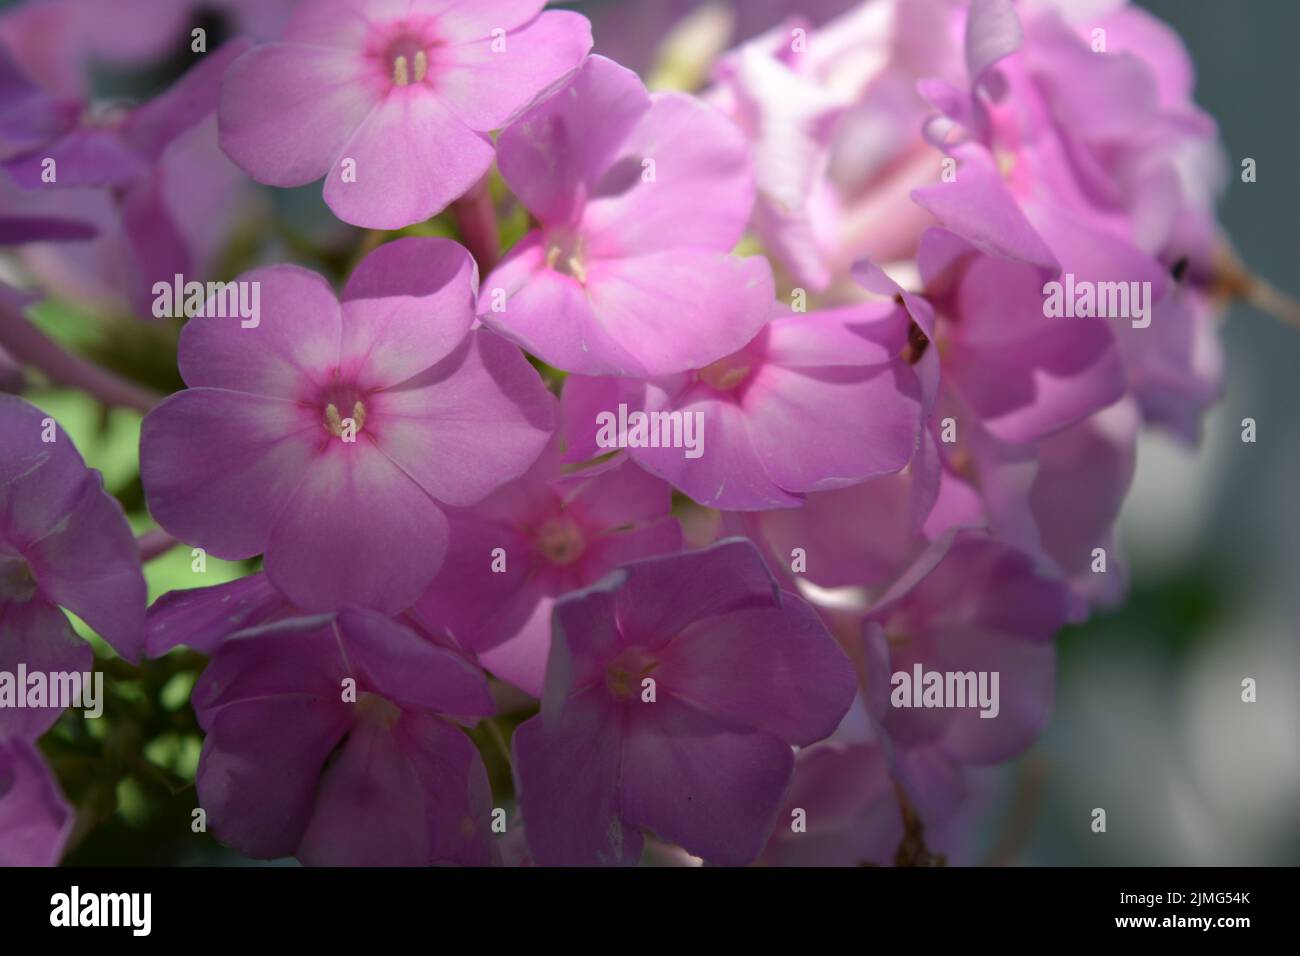 Many bright unforgettable small flowers of crimson, pink, white-pink color illuminated by the sun. Phloxes are the cutest summer flowers blooming. Stock Photo